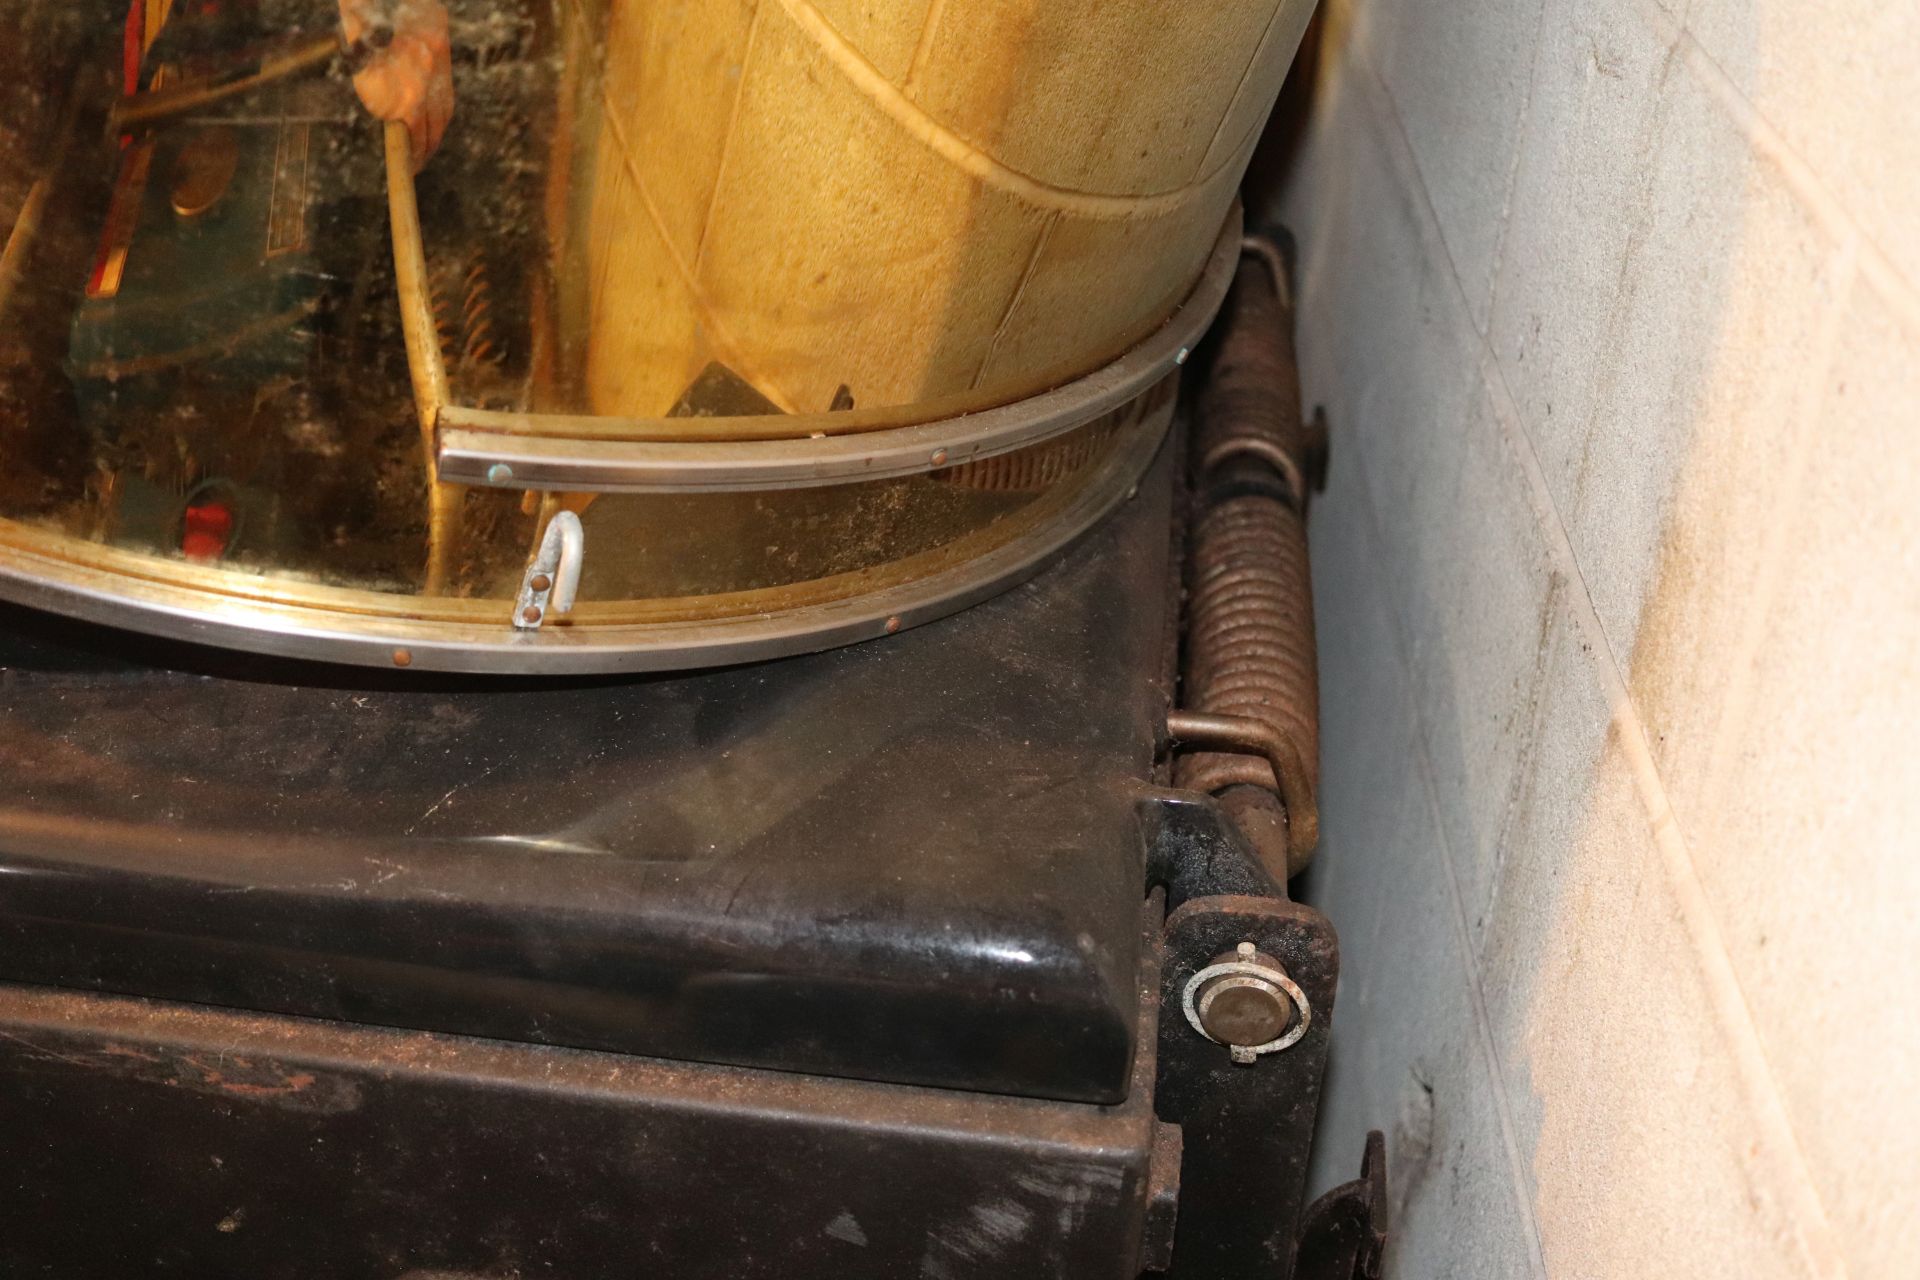 Ye Olde Kettle Cooker, model 115TS propane, serial 11150502, fitted with a brass corn roasting kettl - Image 6 of 8